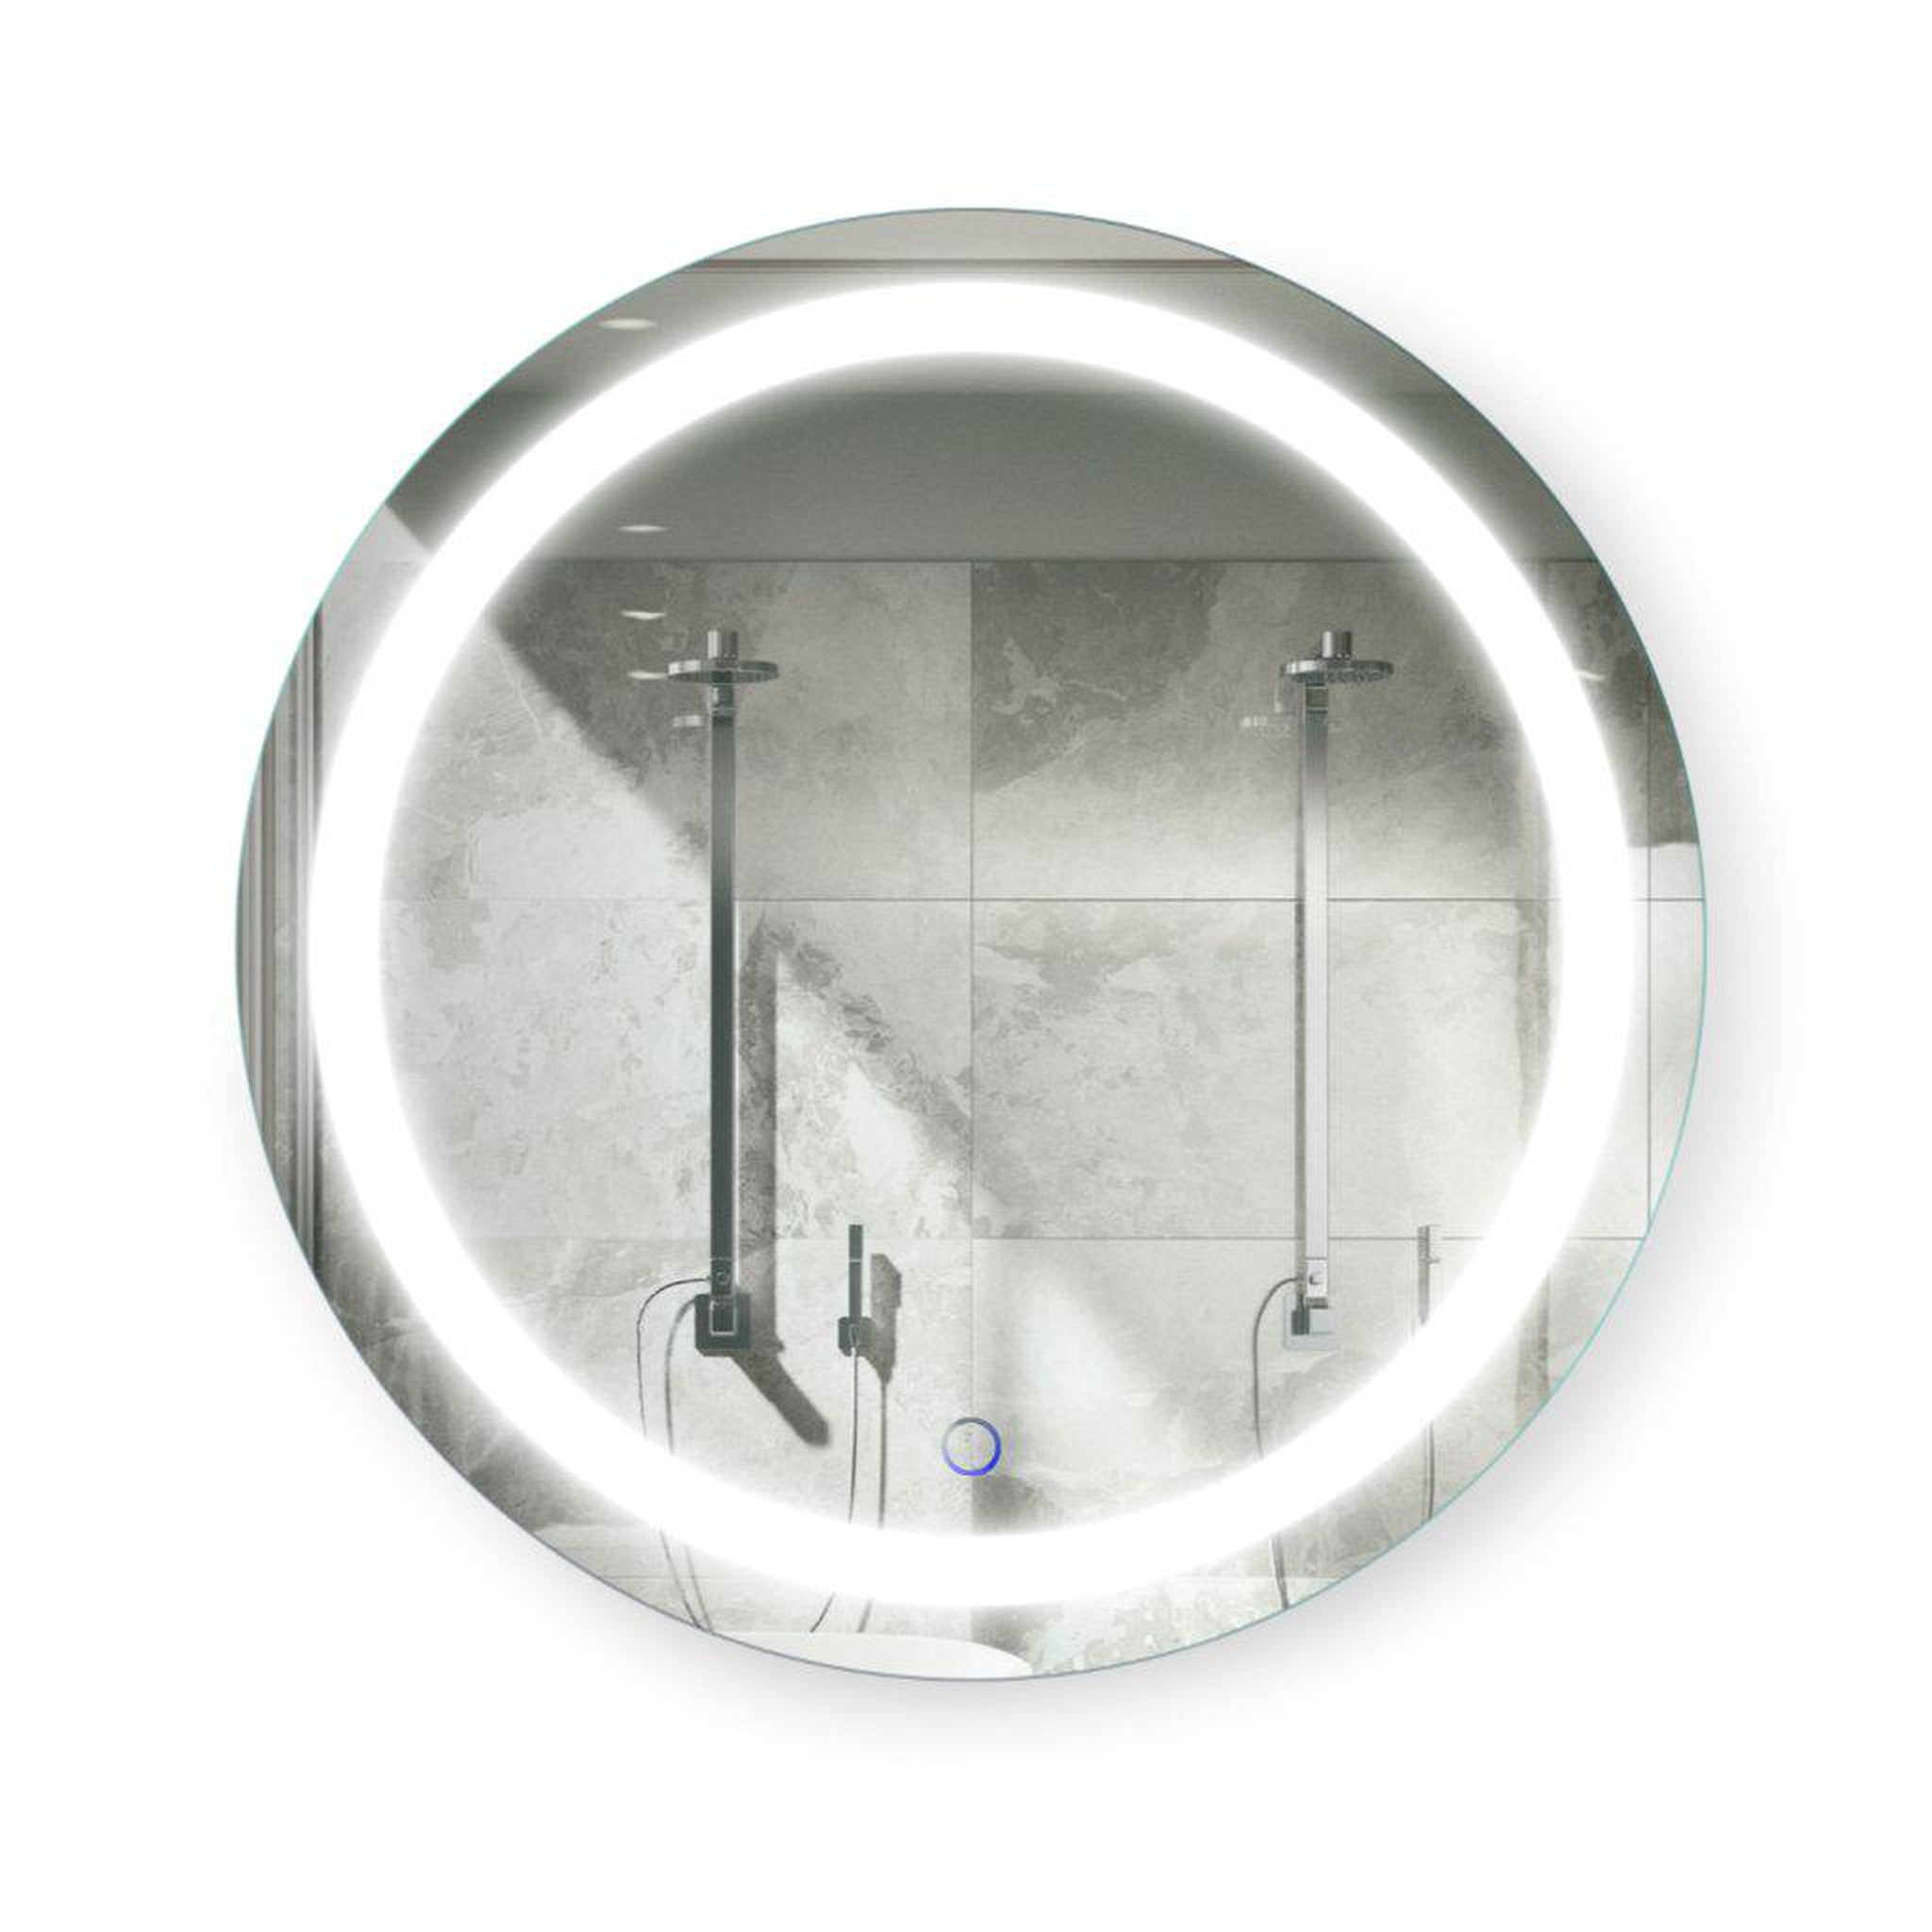 Krugg Reflections, Krugg Reflections Icon 24" x 24" 5000K Round Wall-Mounted Illuminated Silver Backed LED Mirror With Built-in Defogger and Touch Sensor On/Off Built-in Dimmer